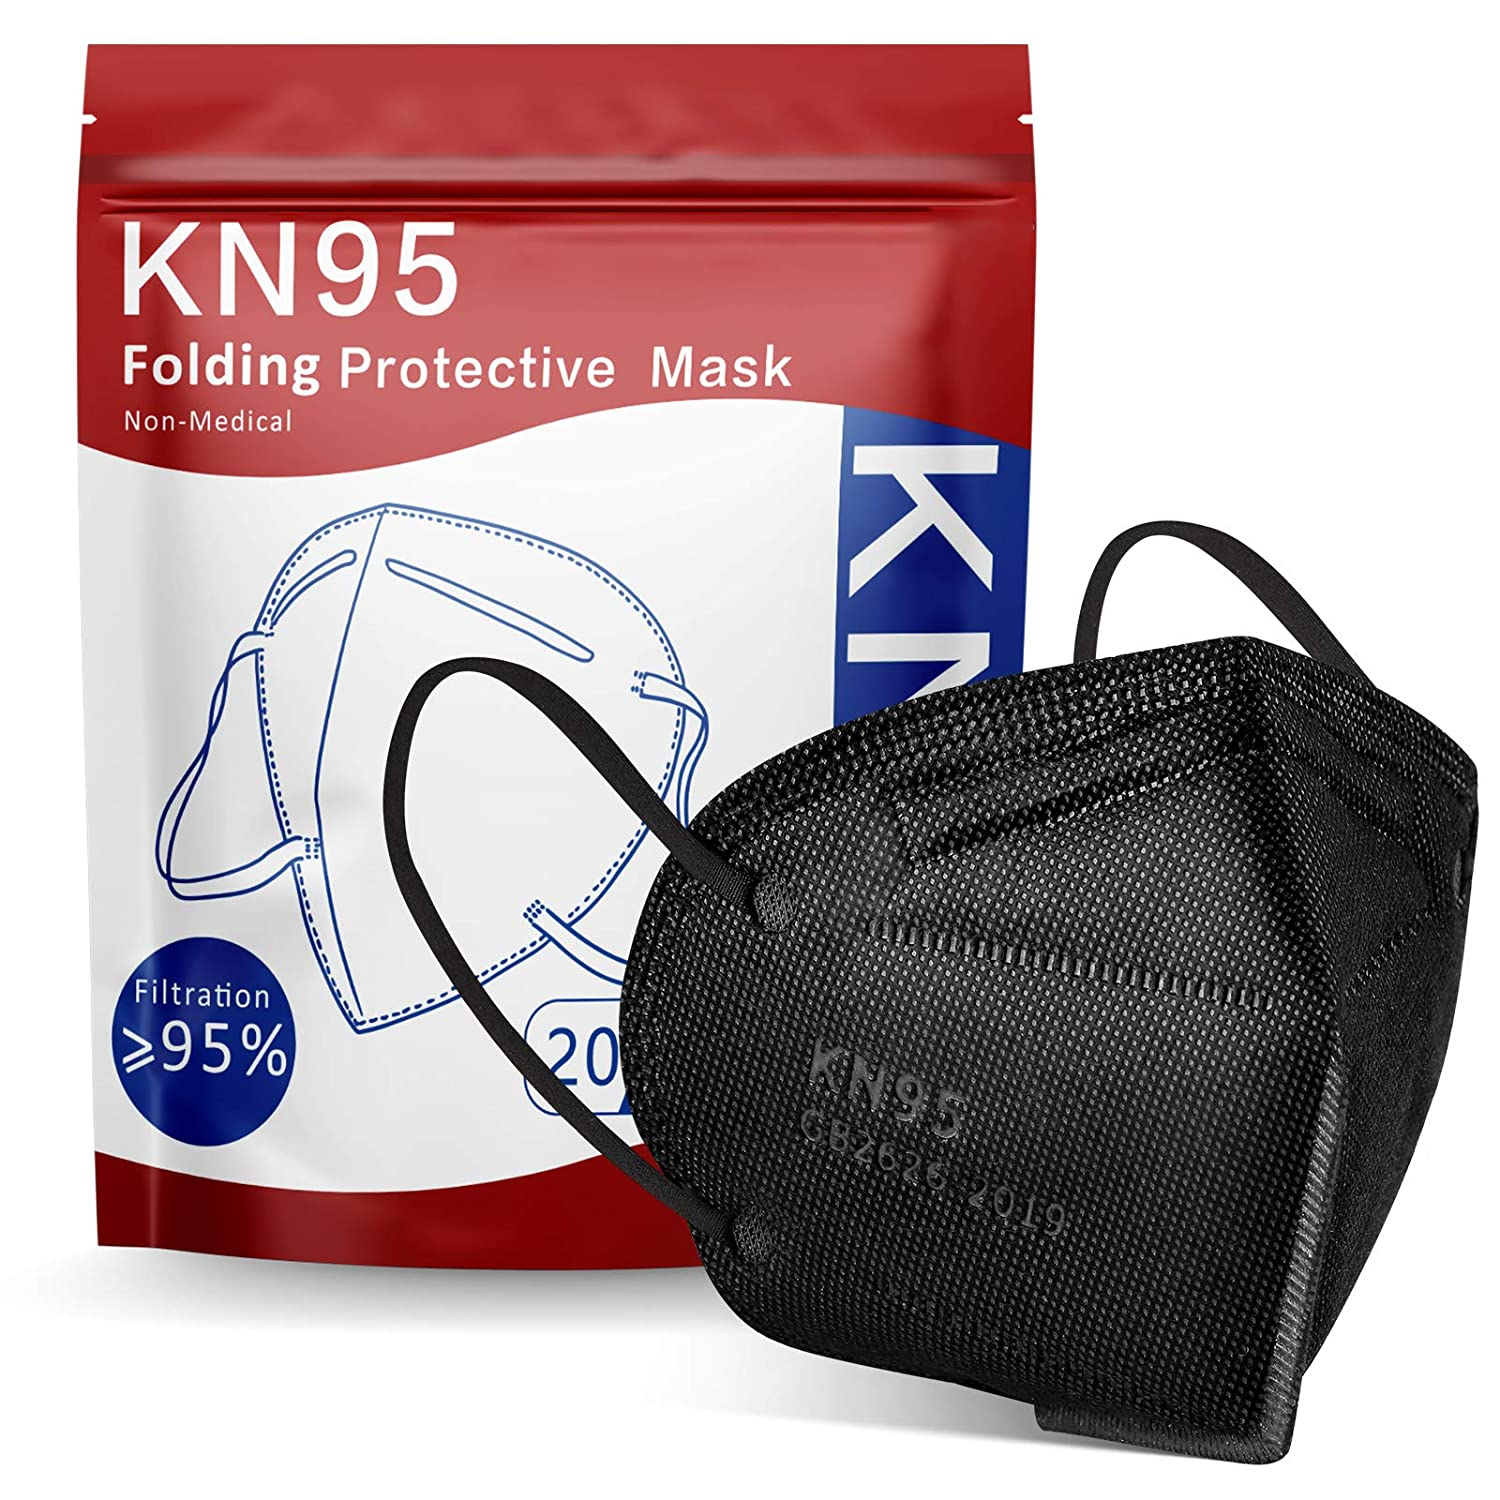 KN95 Face Mask 20 PCs, 5-Ply Cup Dust Safety Masks, Breathable Protection Masks Against PM2.5 for Men & Women Filter Efficiency≥95%, Black